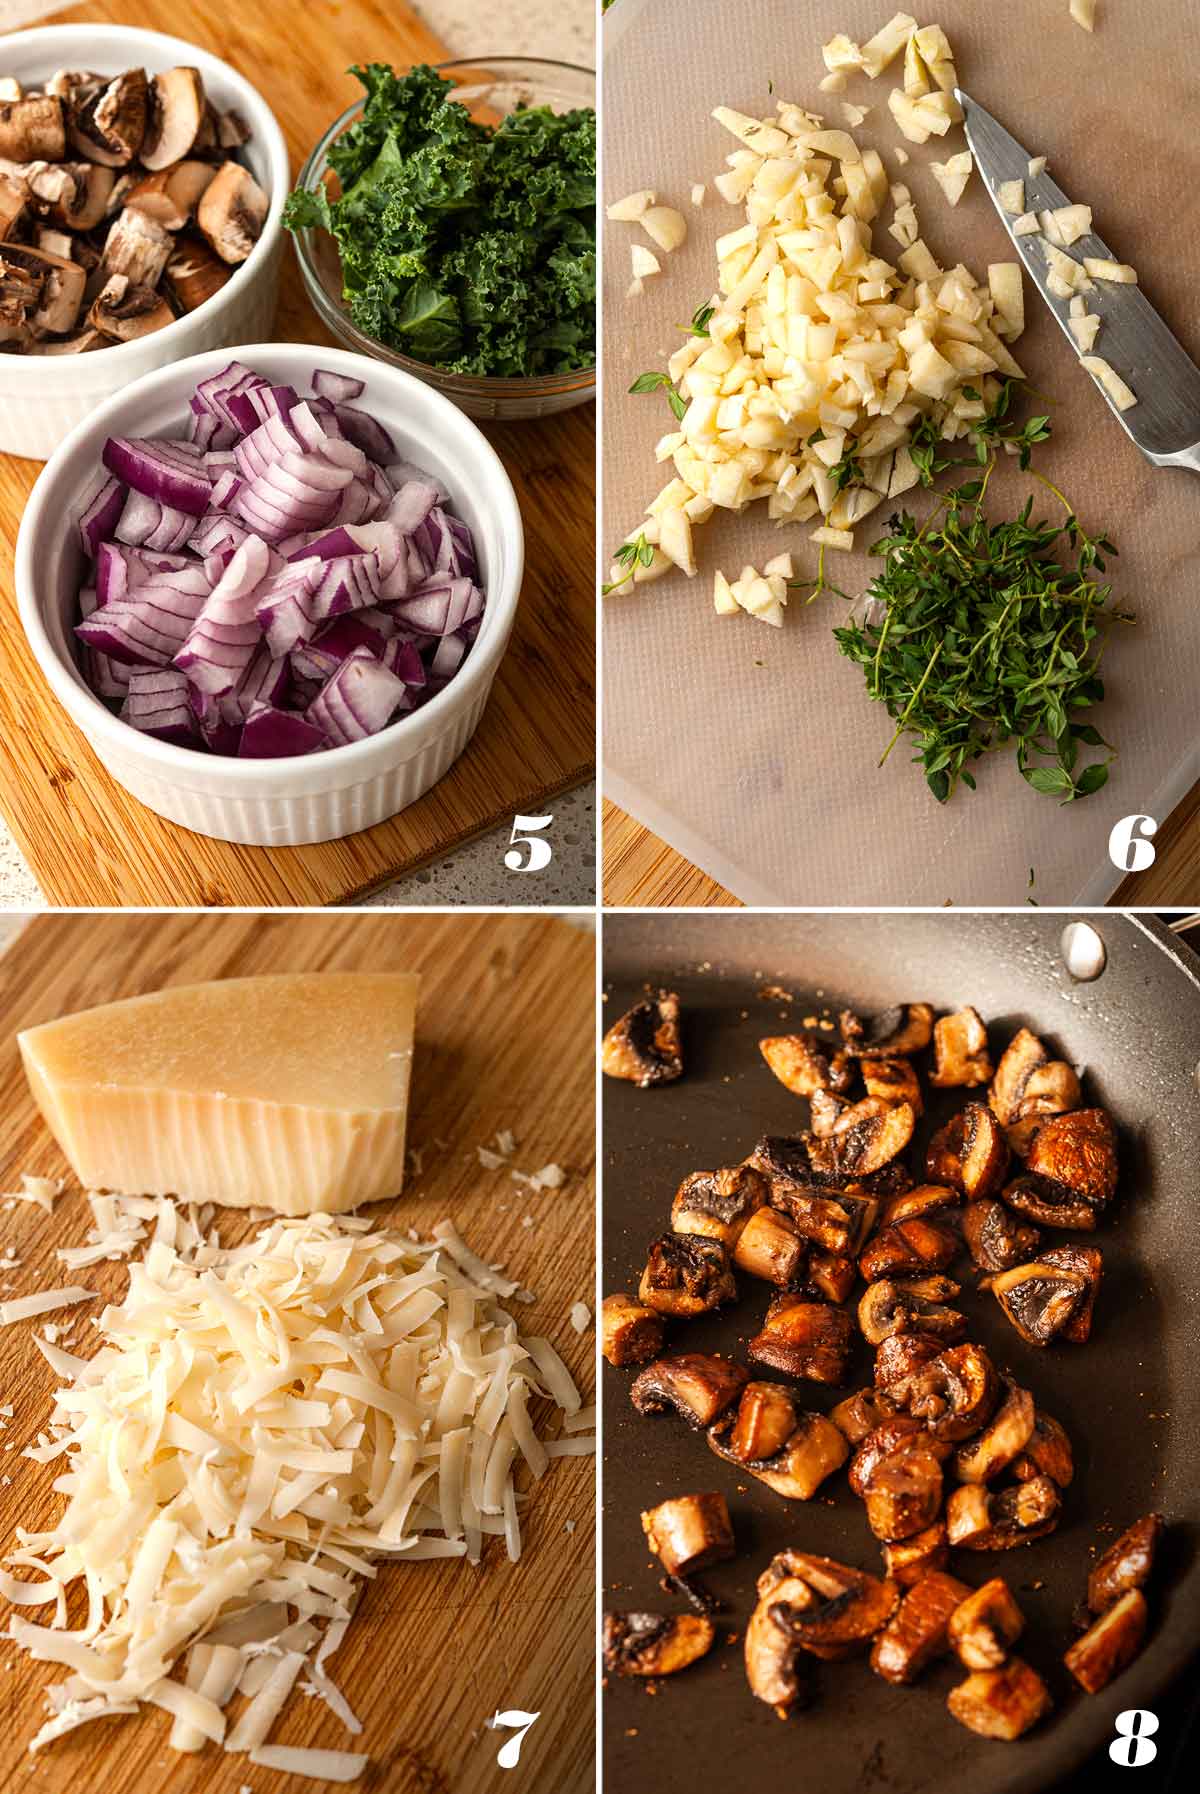 A collage of 4 numbered images showing how to prep vegetables and cheese.